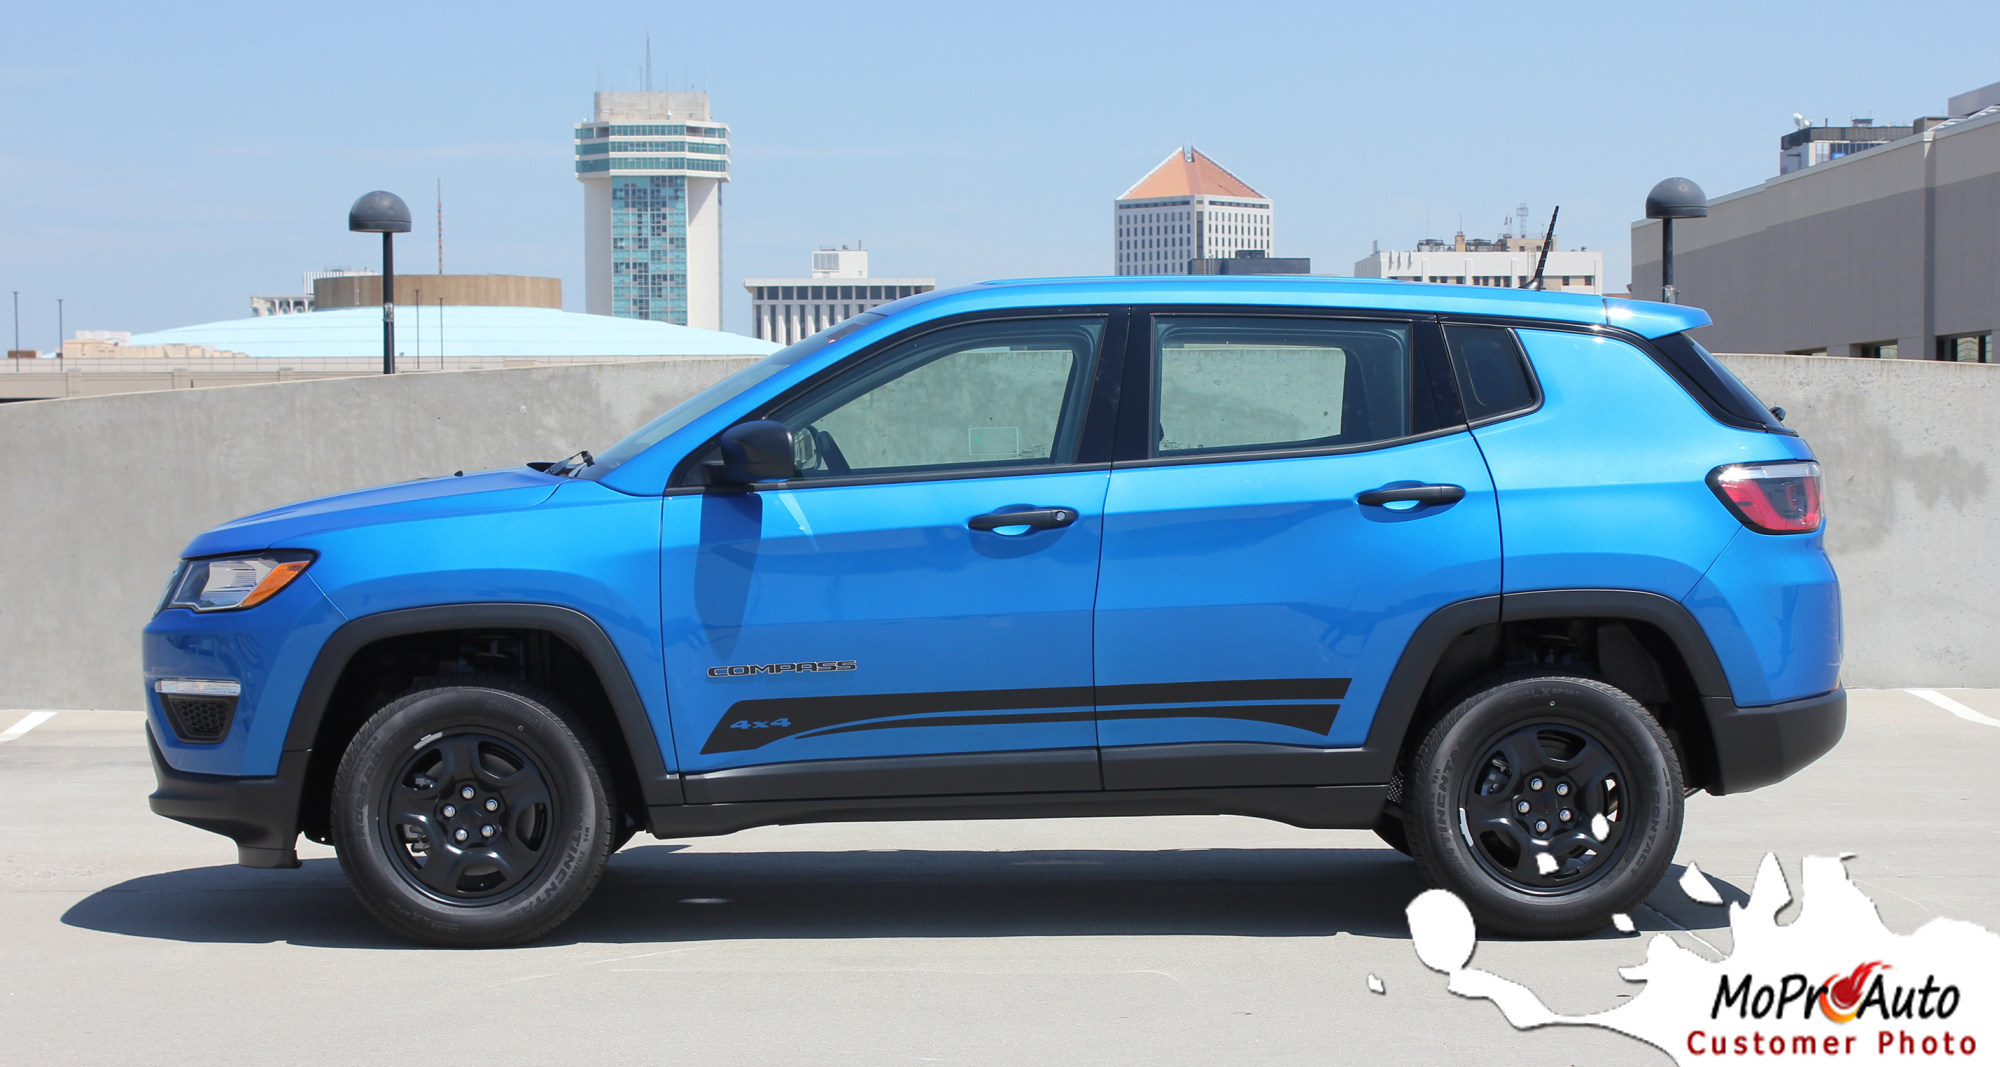 2017, 2018, 2019, 2020, 2021 Jeep Compass Vinyl Graphics Decals Stripes | Customer Photo Course